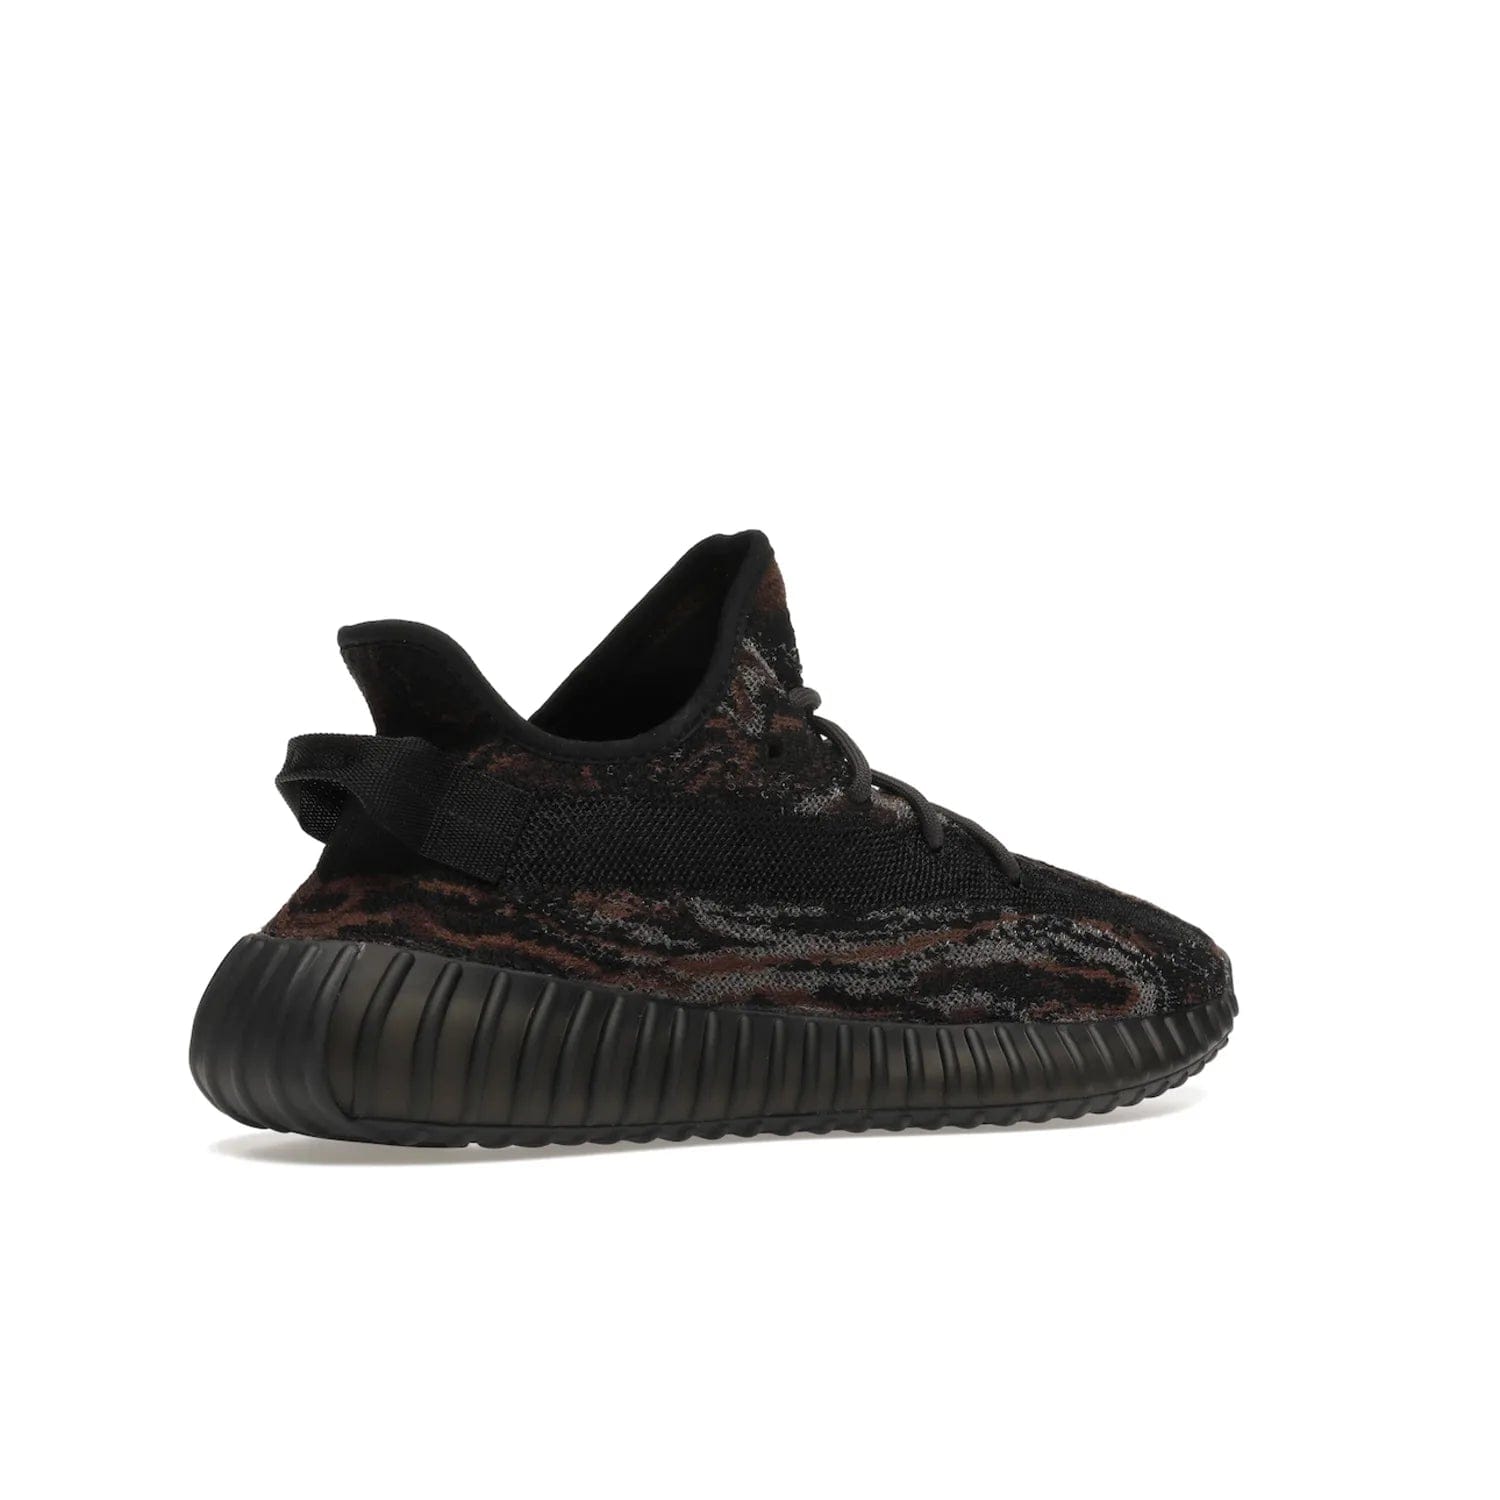 adidas Yeezy Boost 350 V2 MX Rock - Image 34 - Only at www.BallersClubKickz.com - The adidas Yeezy Boost 350 V2 MX Rock features a stylish marbled upper of black, grey, and brown tones. Shop the signature Boost sole, heel tab, and mesh side stripe now, available December of 2021.